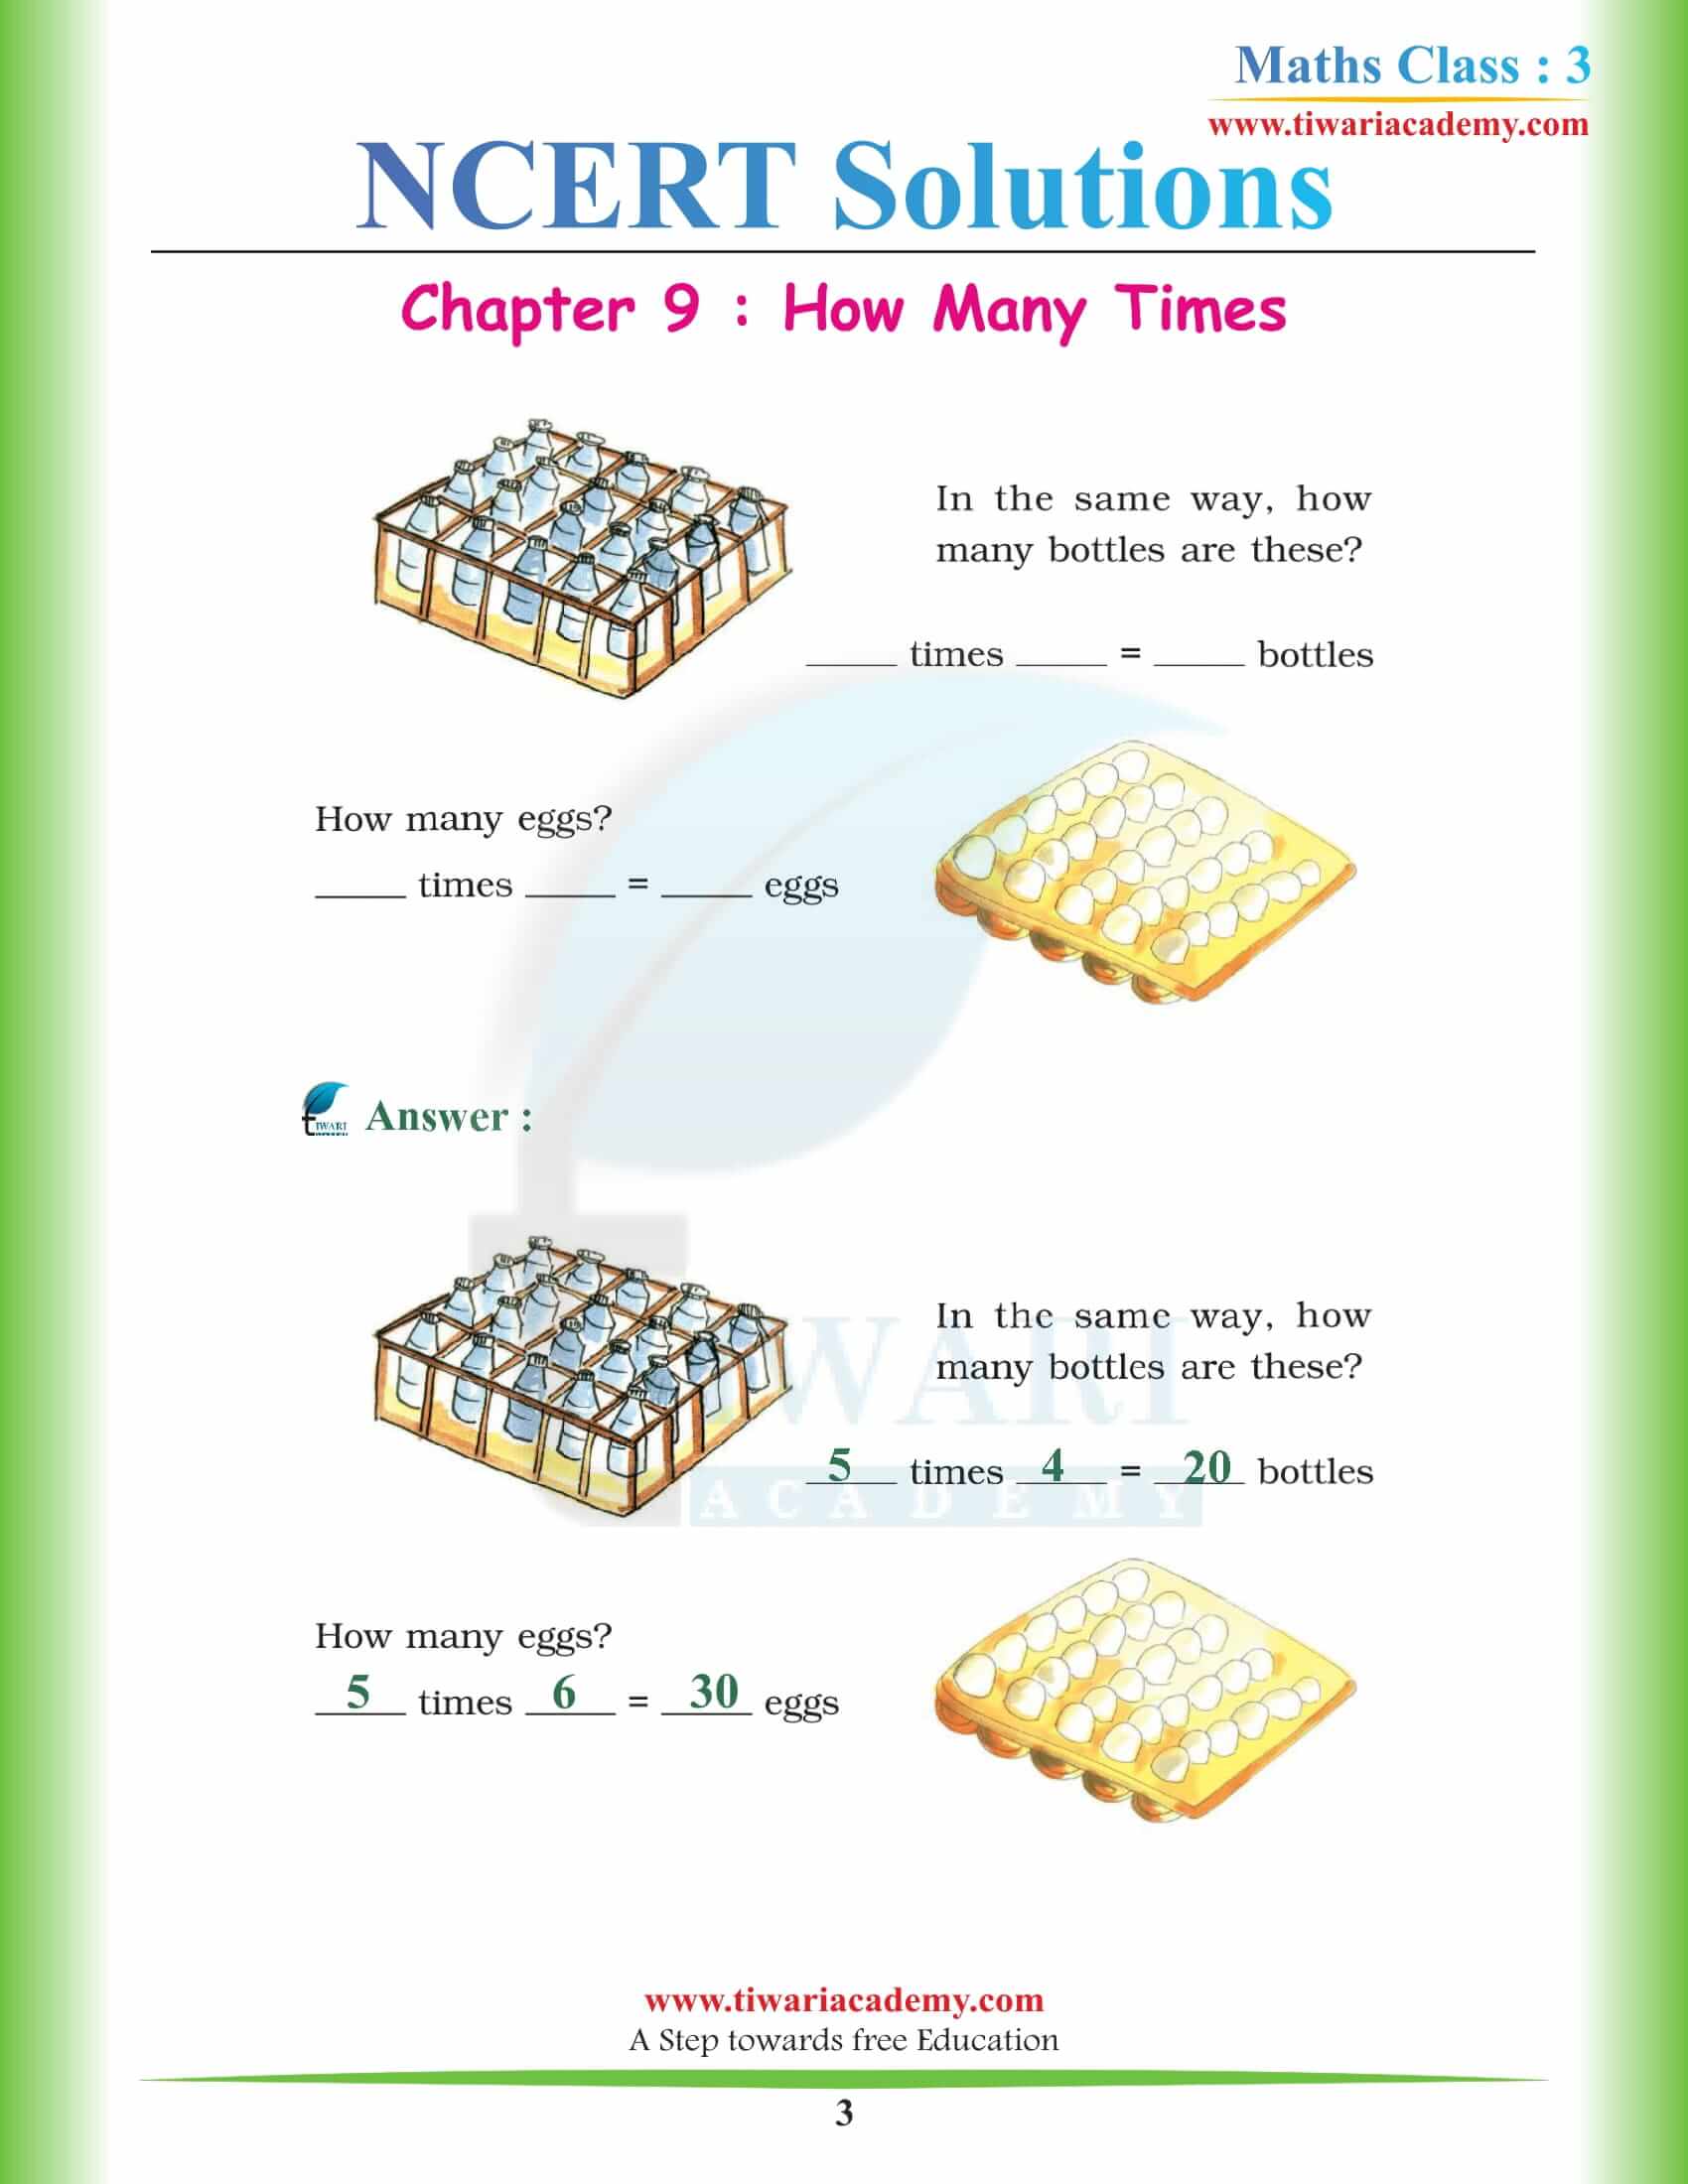 NCERT Solutions for Class 3 Maths Chapter 9 How Many Times? free download